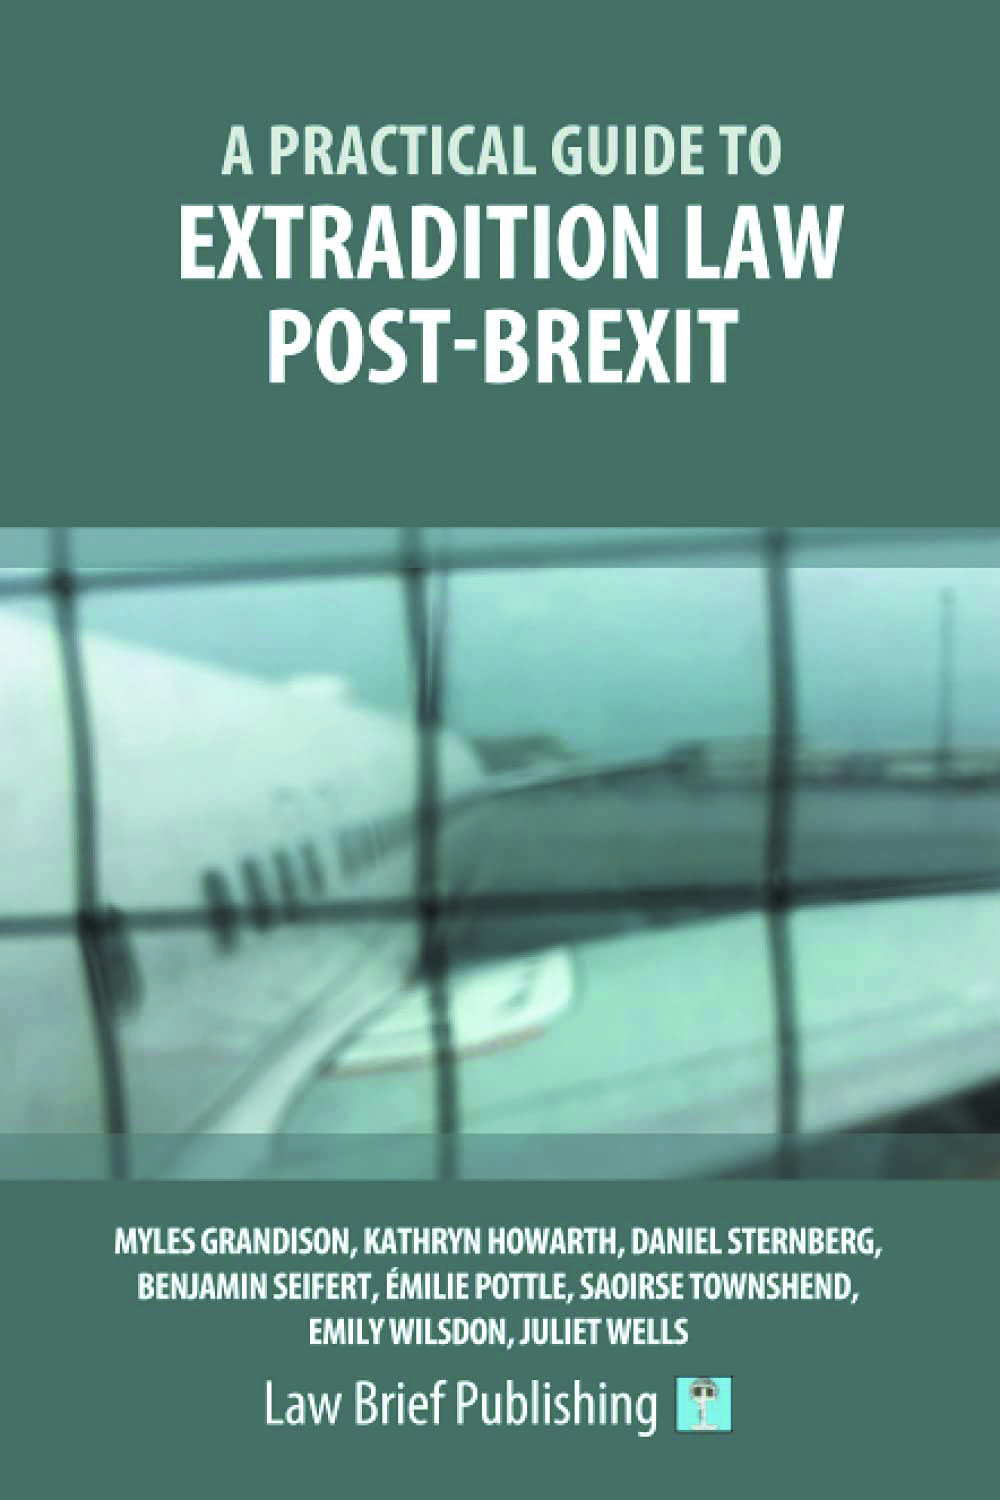 Cover, A practical guide to extradition law post-brexit